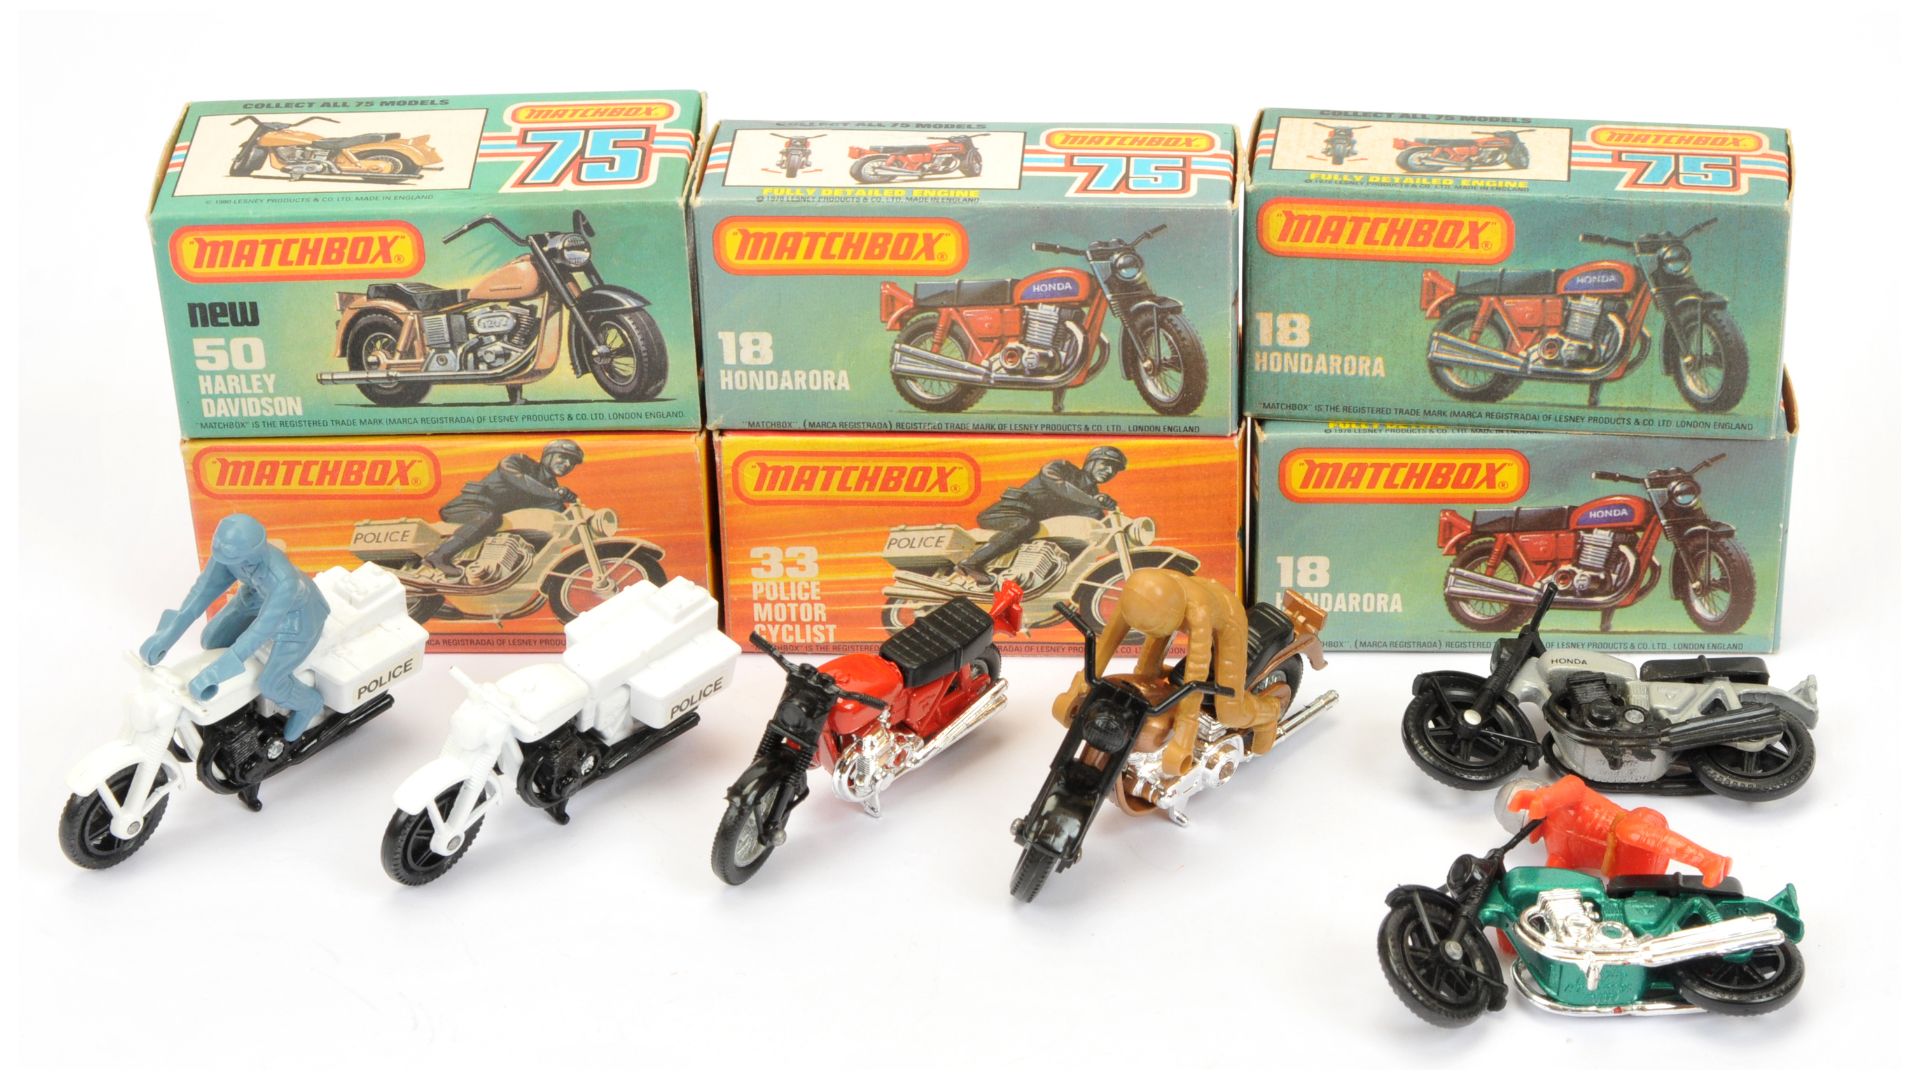 Matchbox Superfast Group Of 6 Motorcycles To Include  - 18b Hondarora CB750 - Green and Black, 33...